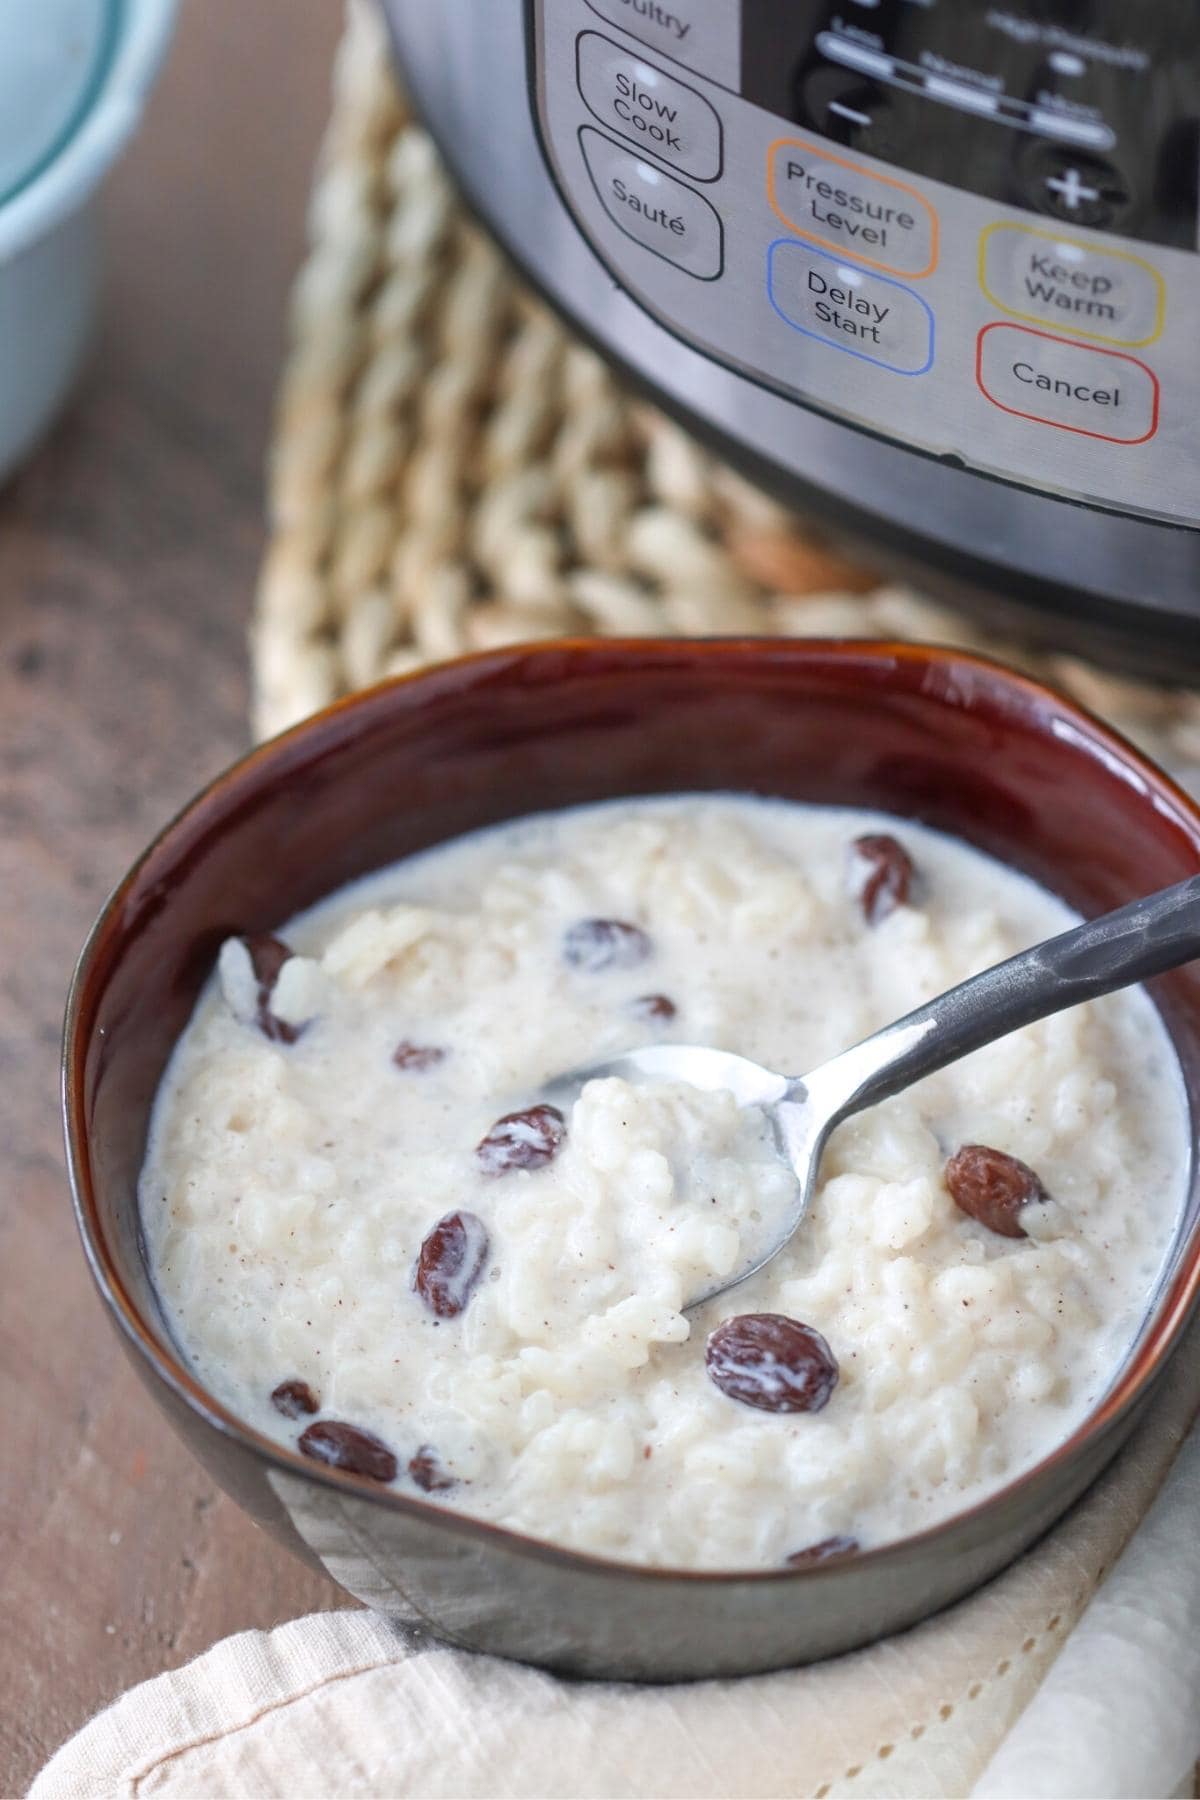 https://www.olgasflavorfactory.com/wp-content/uploads/2022/06/Instant-Pot-Rice-Pudding-1.jpg